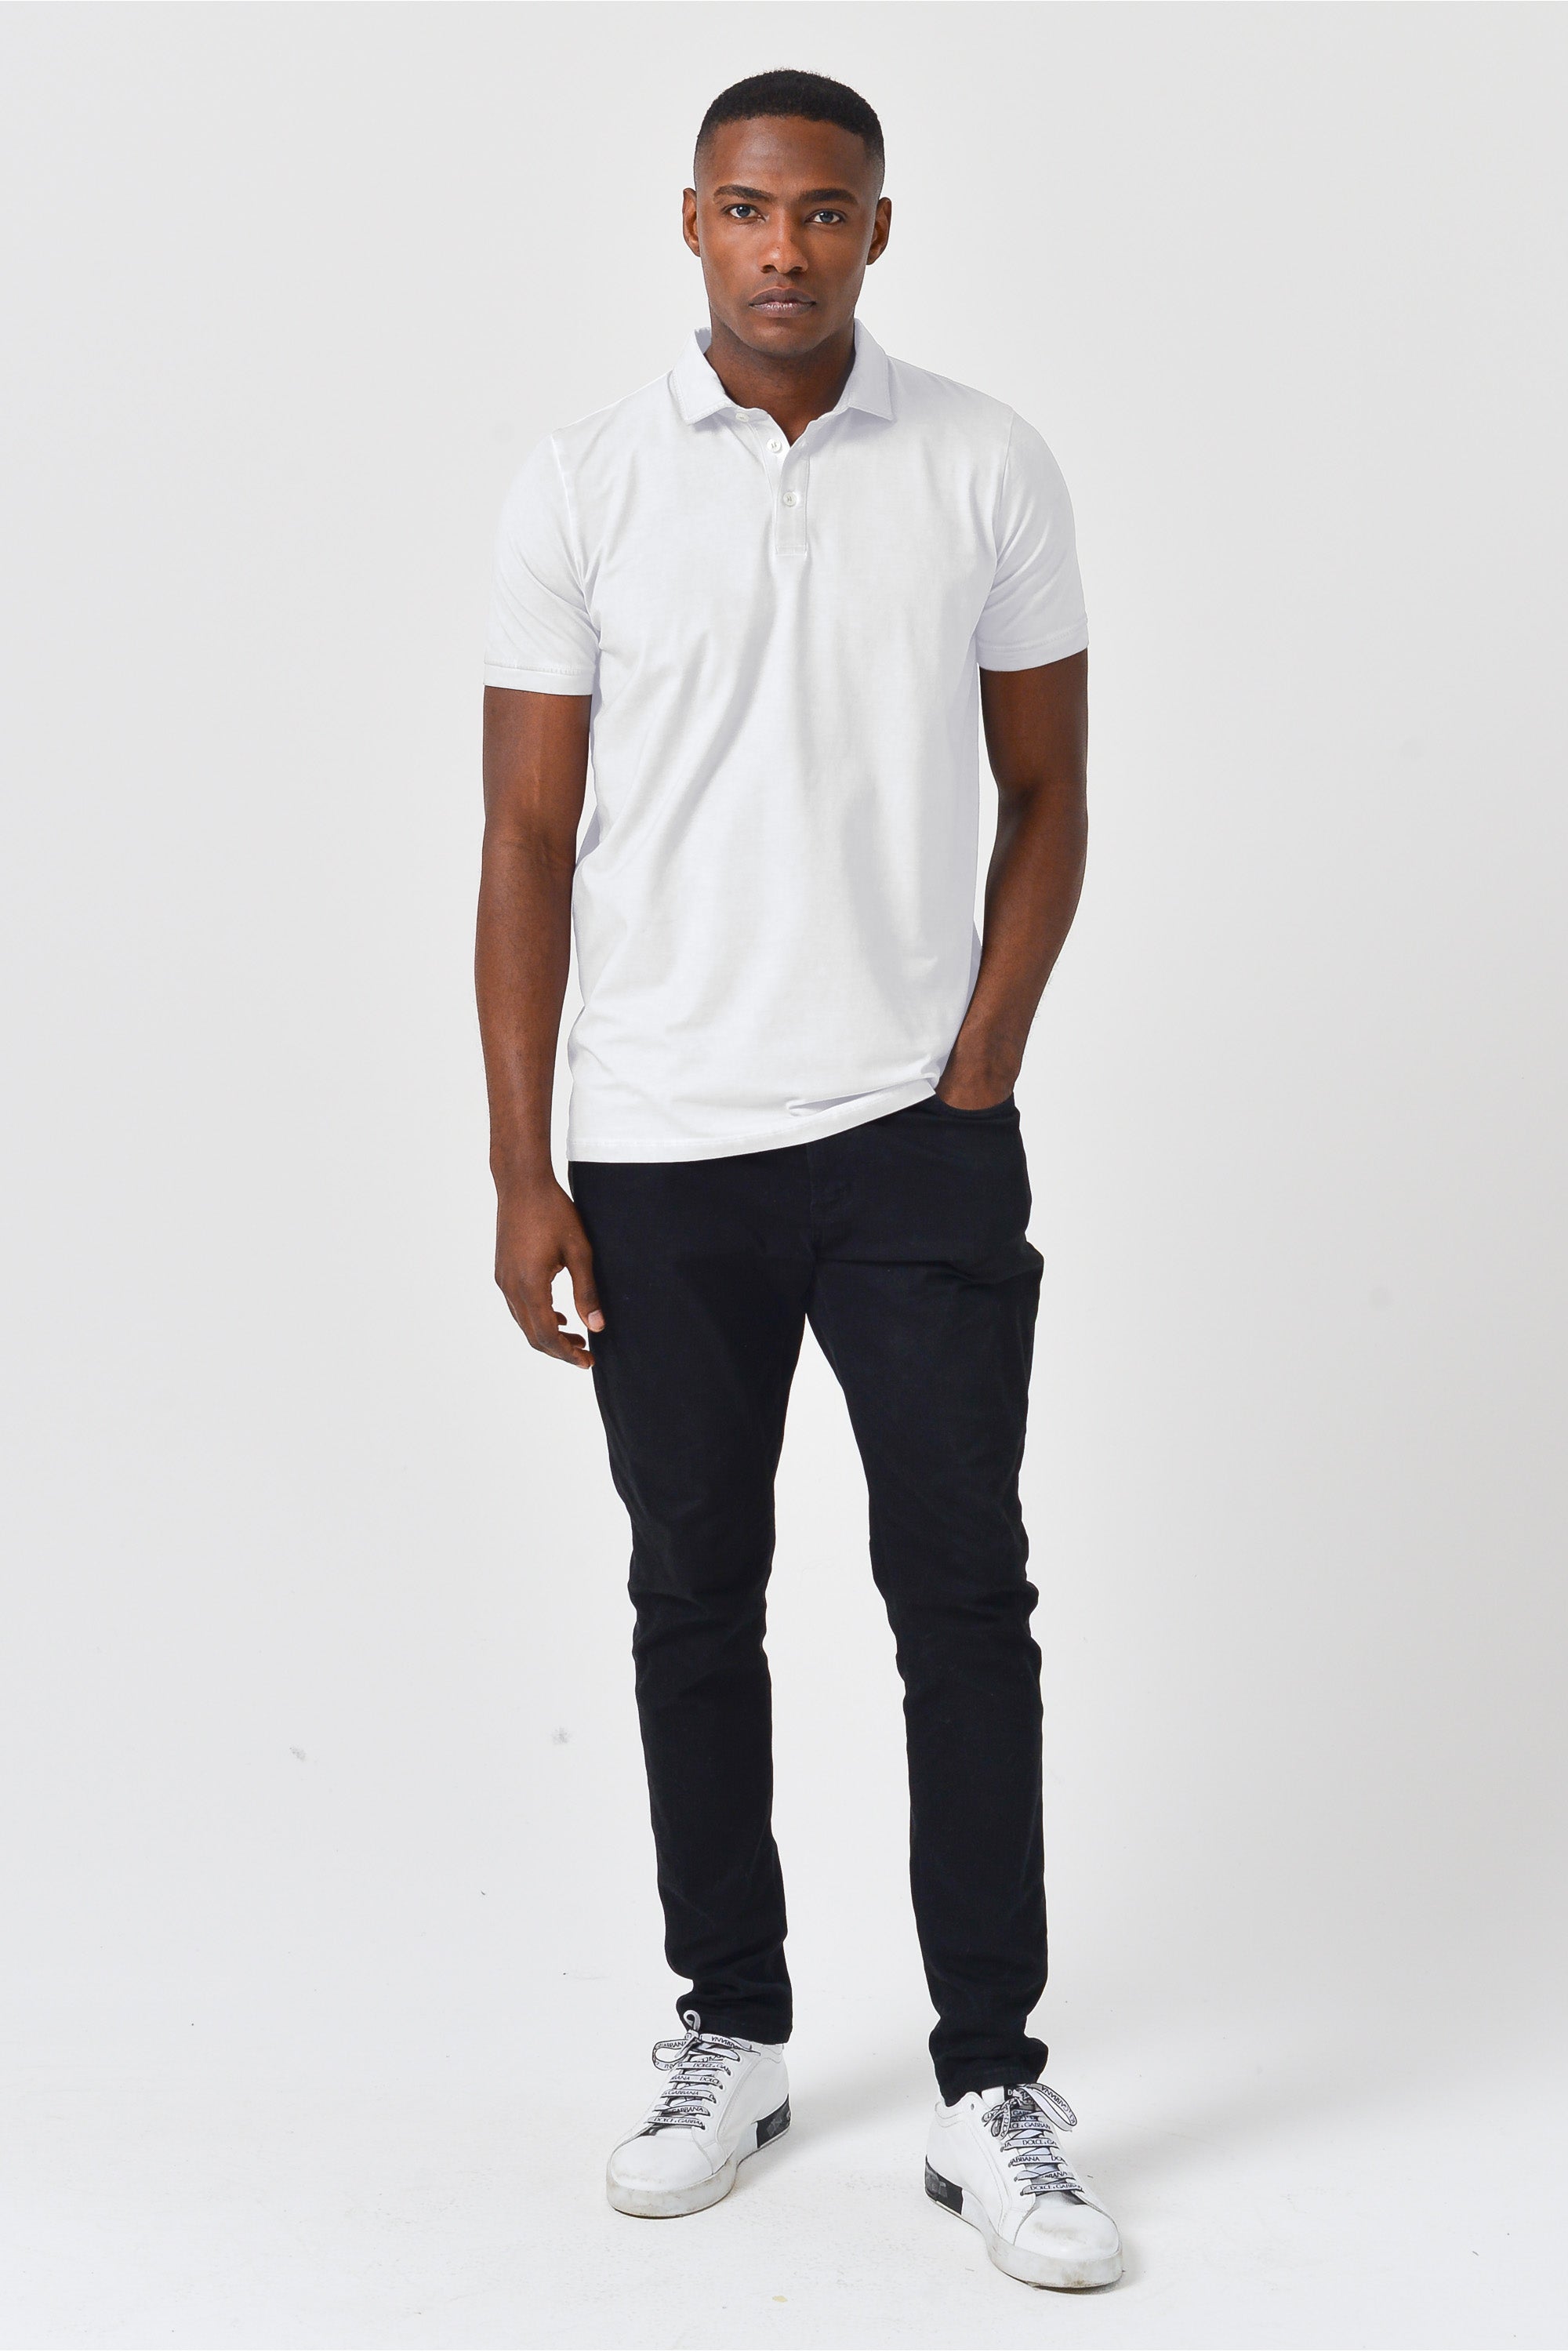 Performance Polo in White